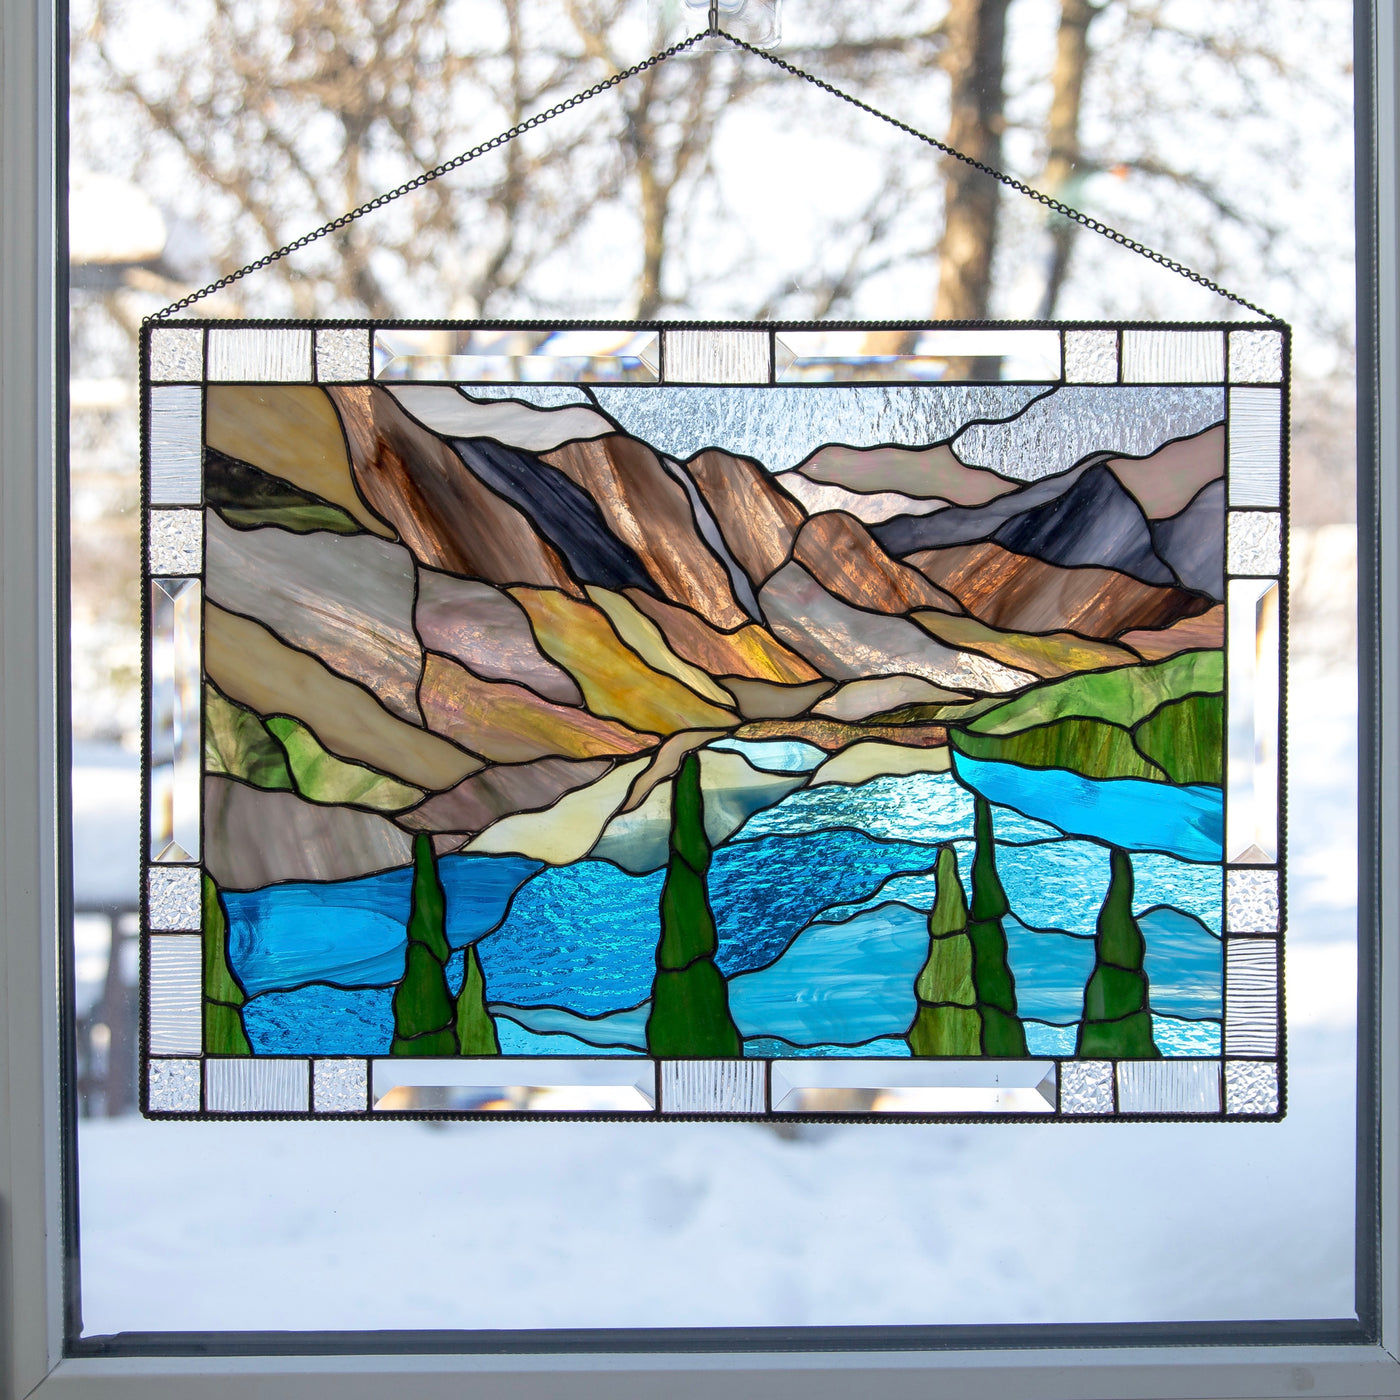 Stained glass Banff national park panel for wall